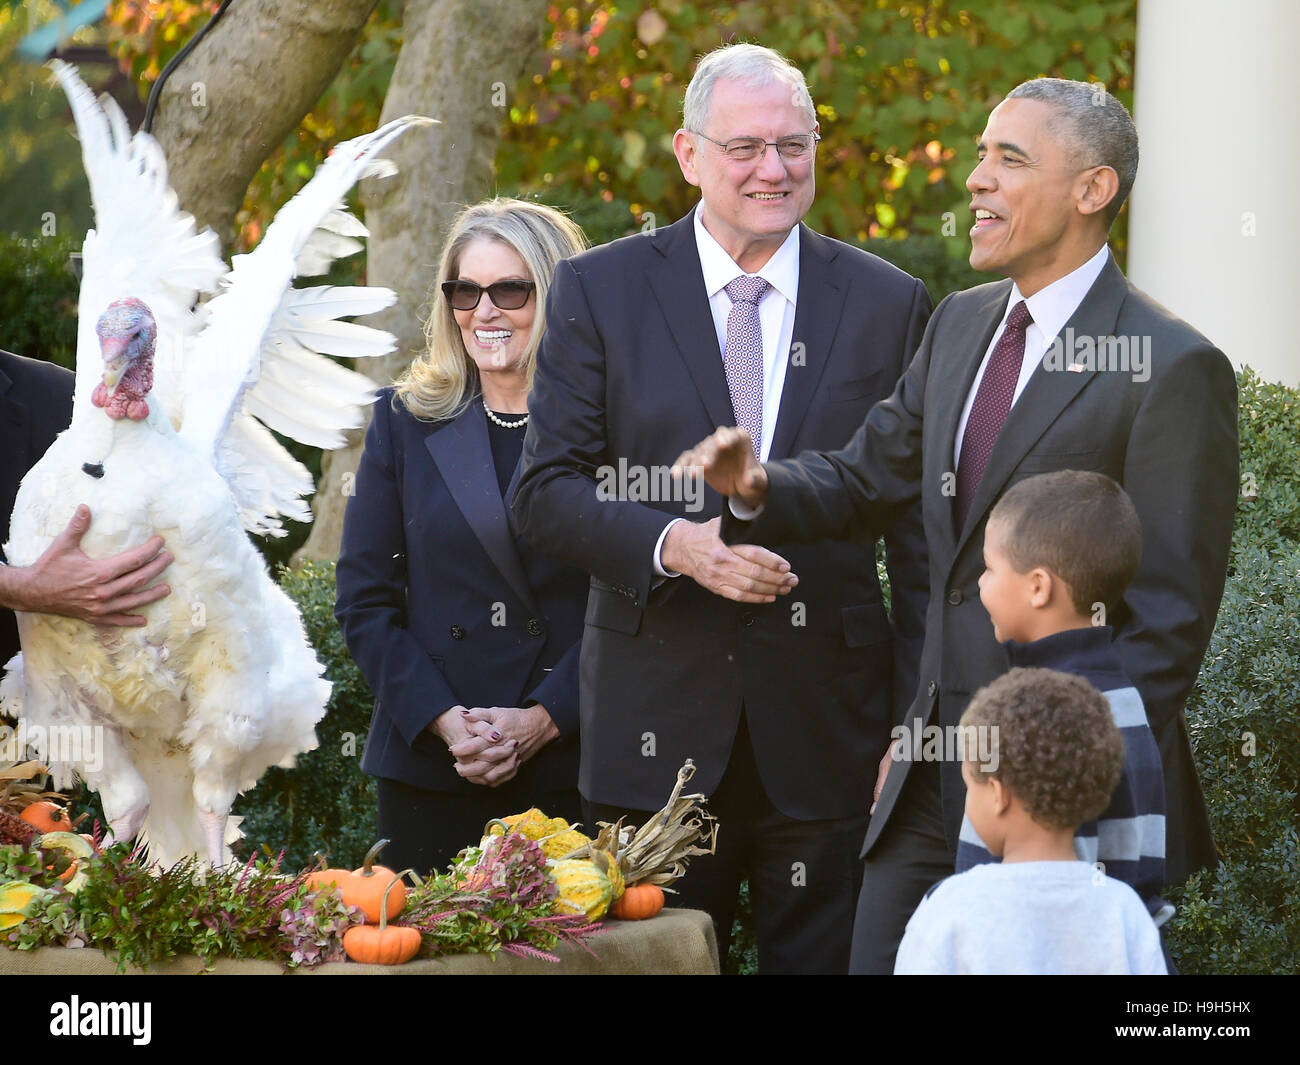 Washington DC, USA. 23rd November, 2016. United States President Barack Obama pardons the 2016 National Thanksgiving Turkey, Tater, and its alternate Tot, during a ceremony in the Rose Garden of the White House in Washington, DC. This is the 69th anniversary of this honored tradition began in 1947 by President Harry S Truman. Once pardoned the birds will be sent to their new home at Virginia Tech's Animal and Poultry Sciences Department at “Gobbler's Rest” in Blacksburg, Virginia where they will be cared for by students and veterinarians. Credit:  MediaPunch Inc/Alamy Live News Stock Photo